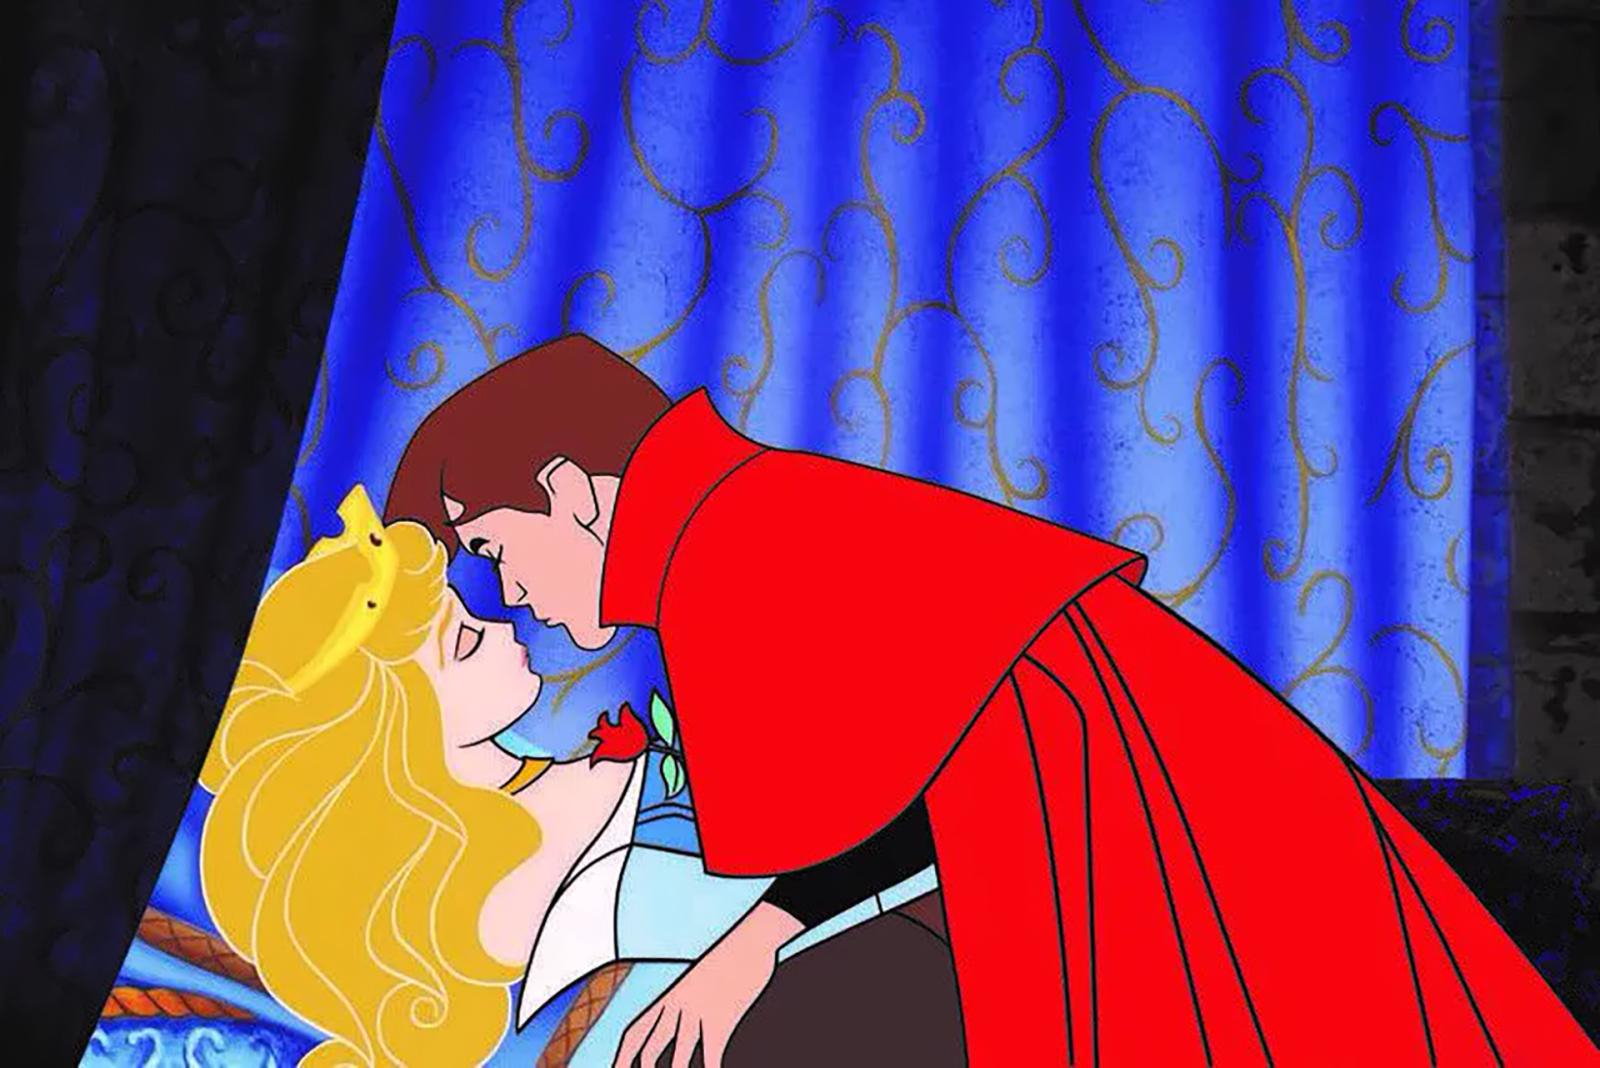 7 Disney Movie Tropes That Are Problematic As Hell (Or Just Plain Stupid) - image 6